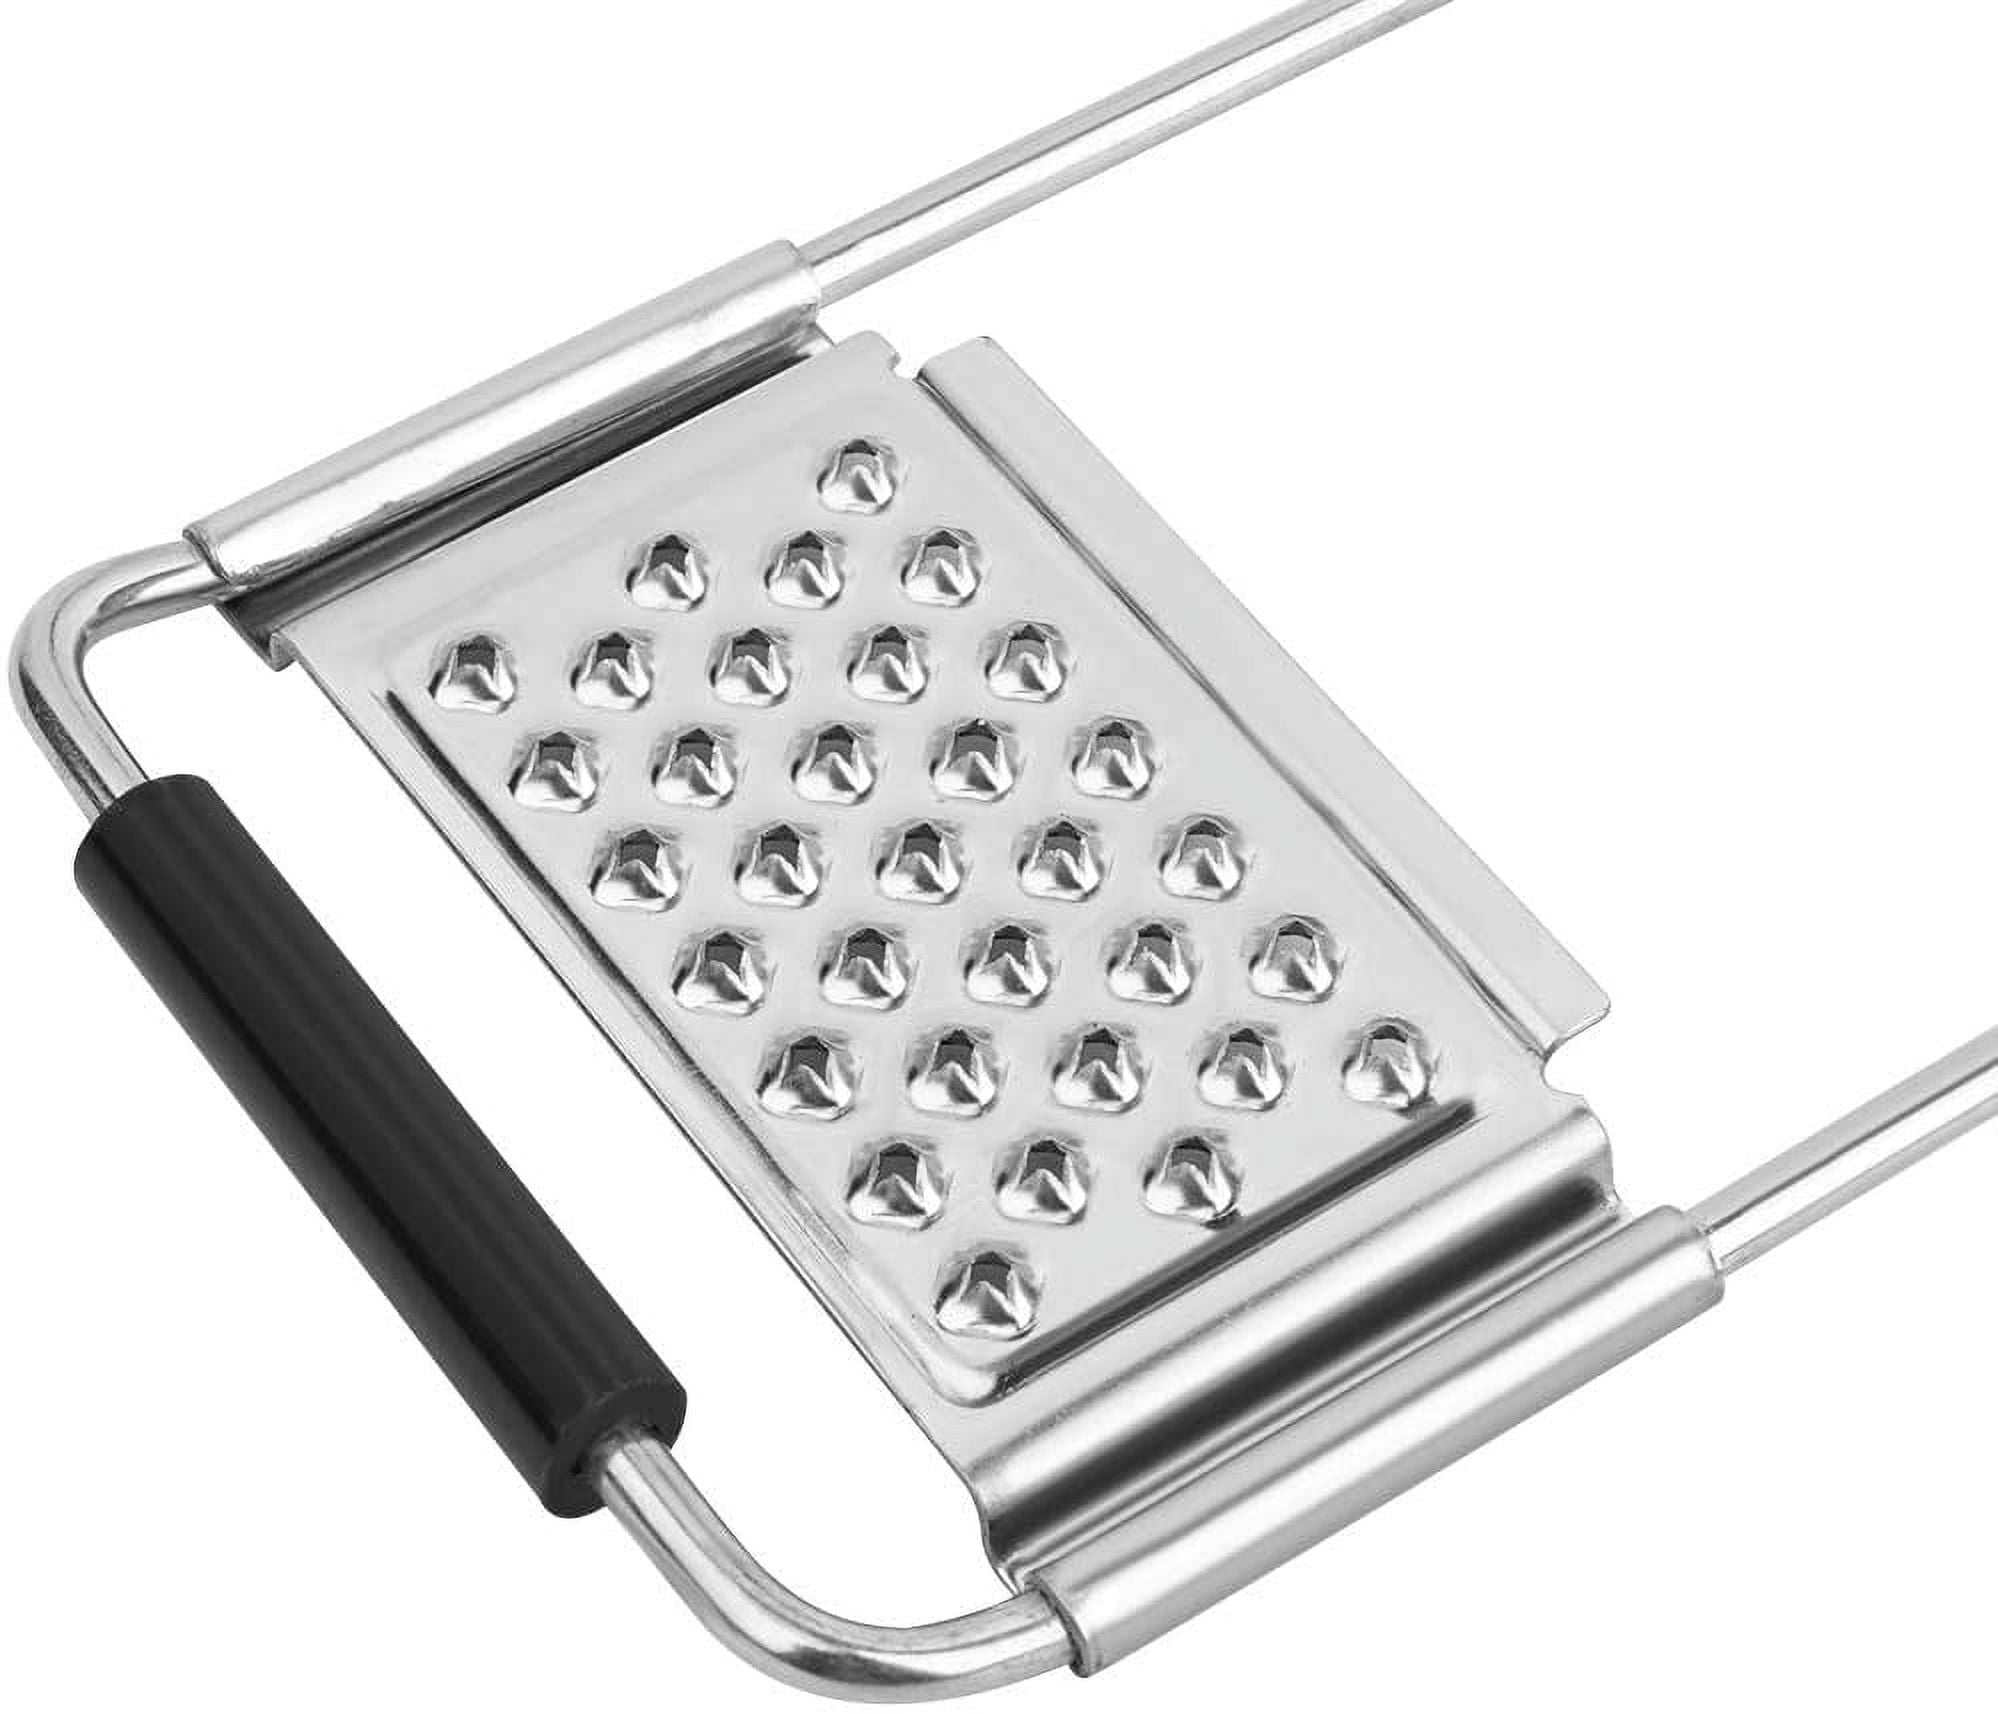  Vegetable Slicer 3 in 1 with Three Nozzles Stainless Steel  Kitchen Grater Manual Grater for Korean Carrots Stainless Steel Vegetable Grater  Carrot Grater Stainless Steel Kitchen Grater: Home & Kitchen